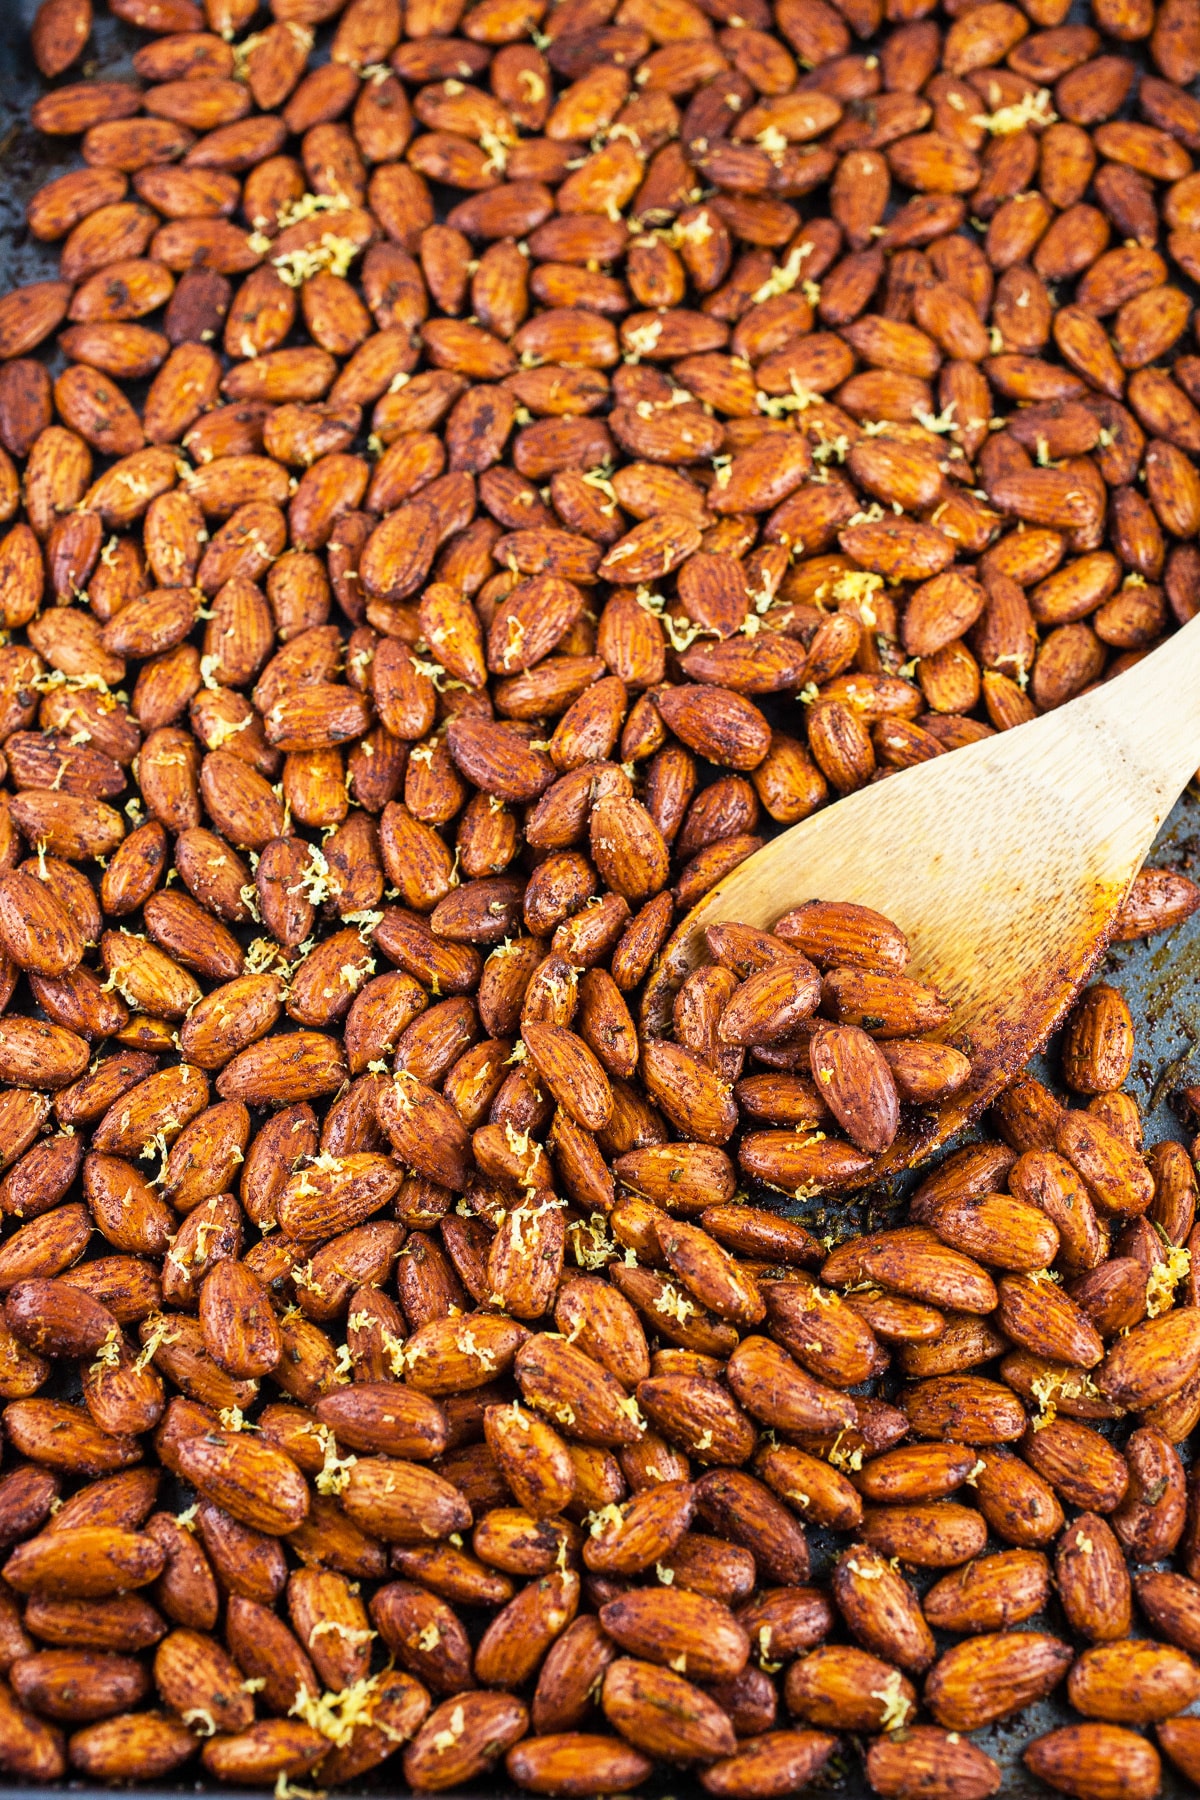 Roasted spiced almonds on baking sheet.